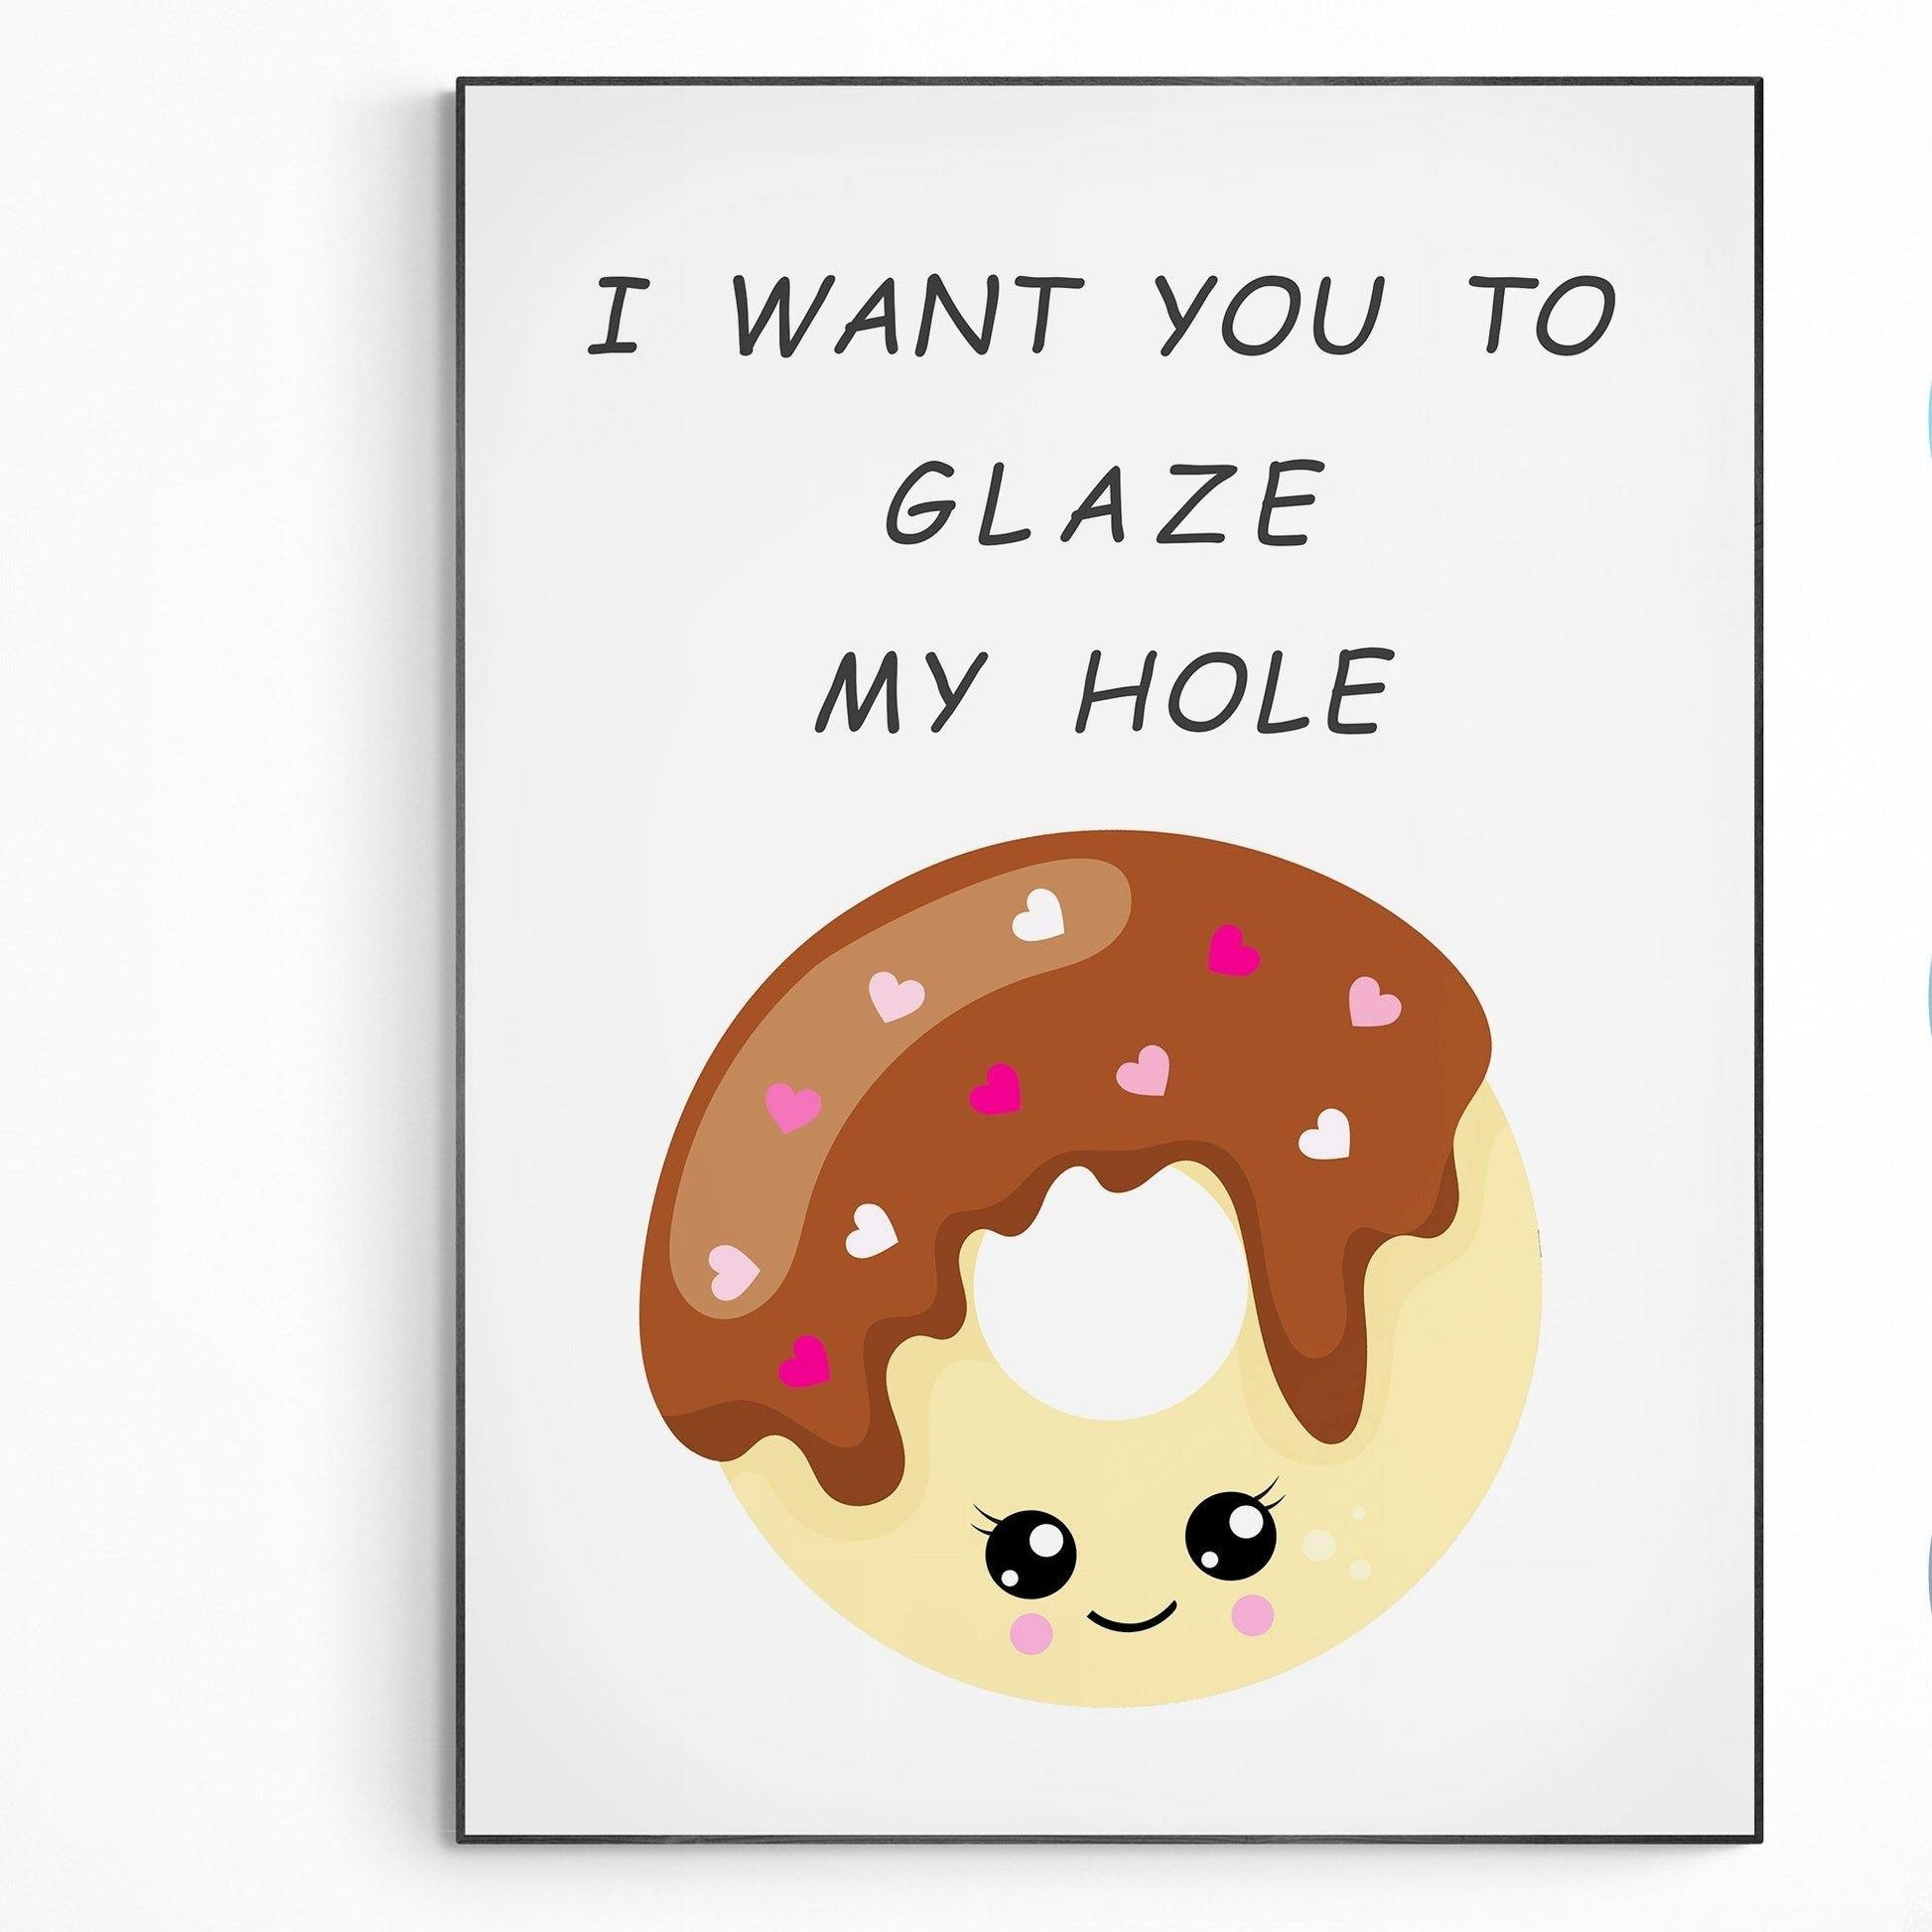 I want you to glaze my hole | Original Poster Art | Fun Print Quote | Motivational Poster Wall Art Decor | Greeting Card Gifts | Variety Sizes